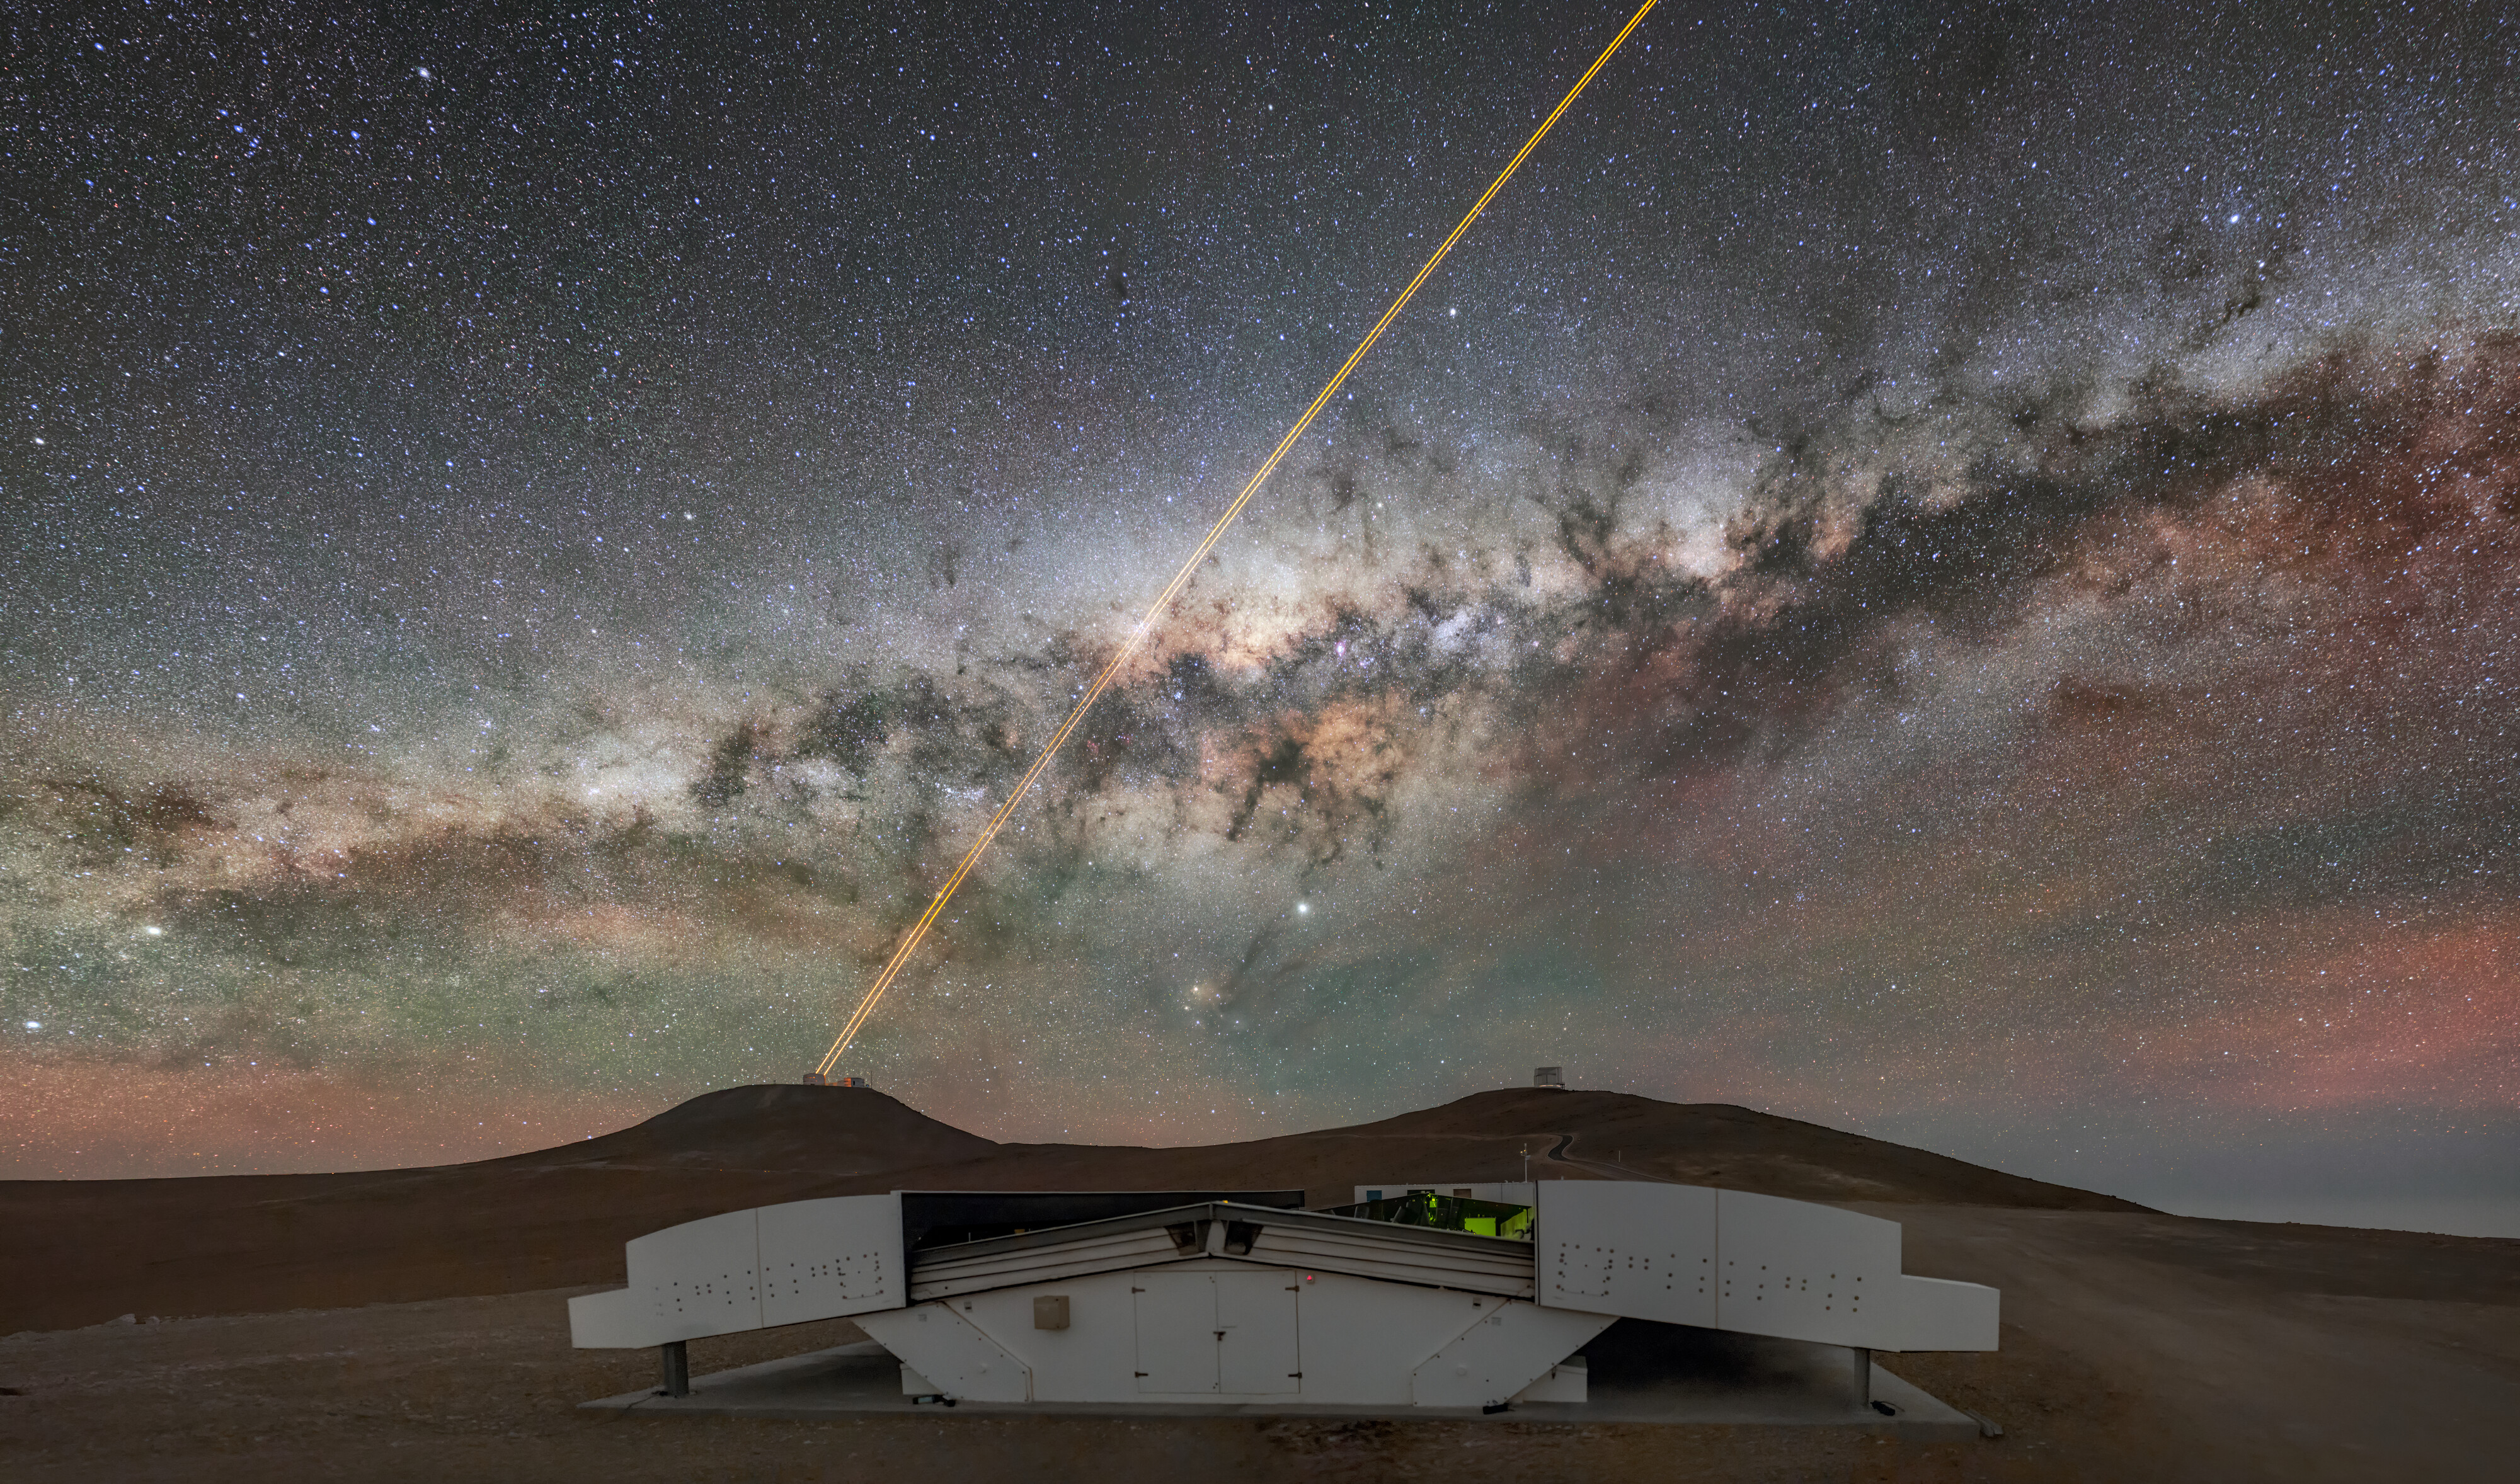 ESO shares this stunning view of Milky Way as it stretches over Atacama Desert